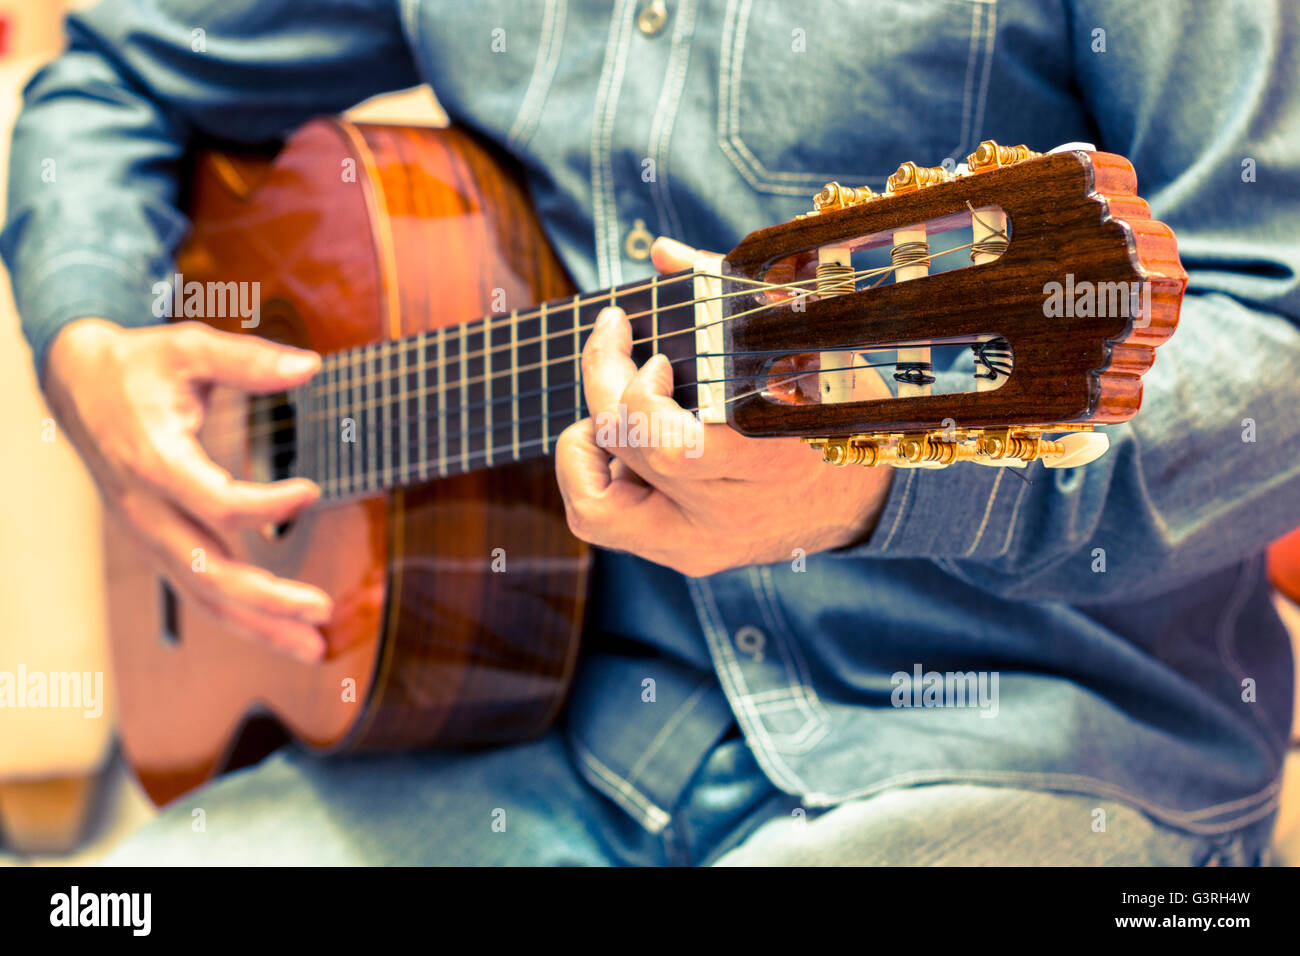 Vintage guitar player in artistic performance Stock Photo